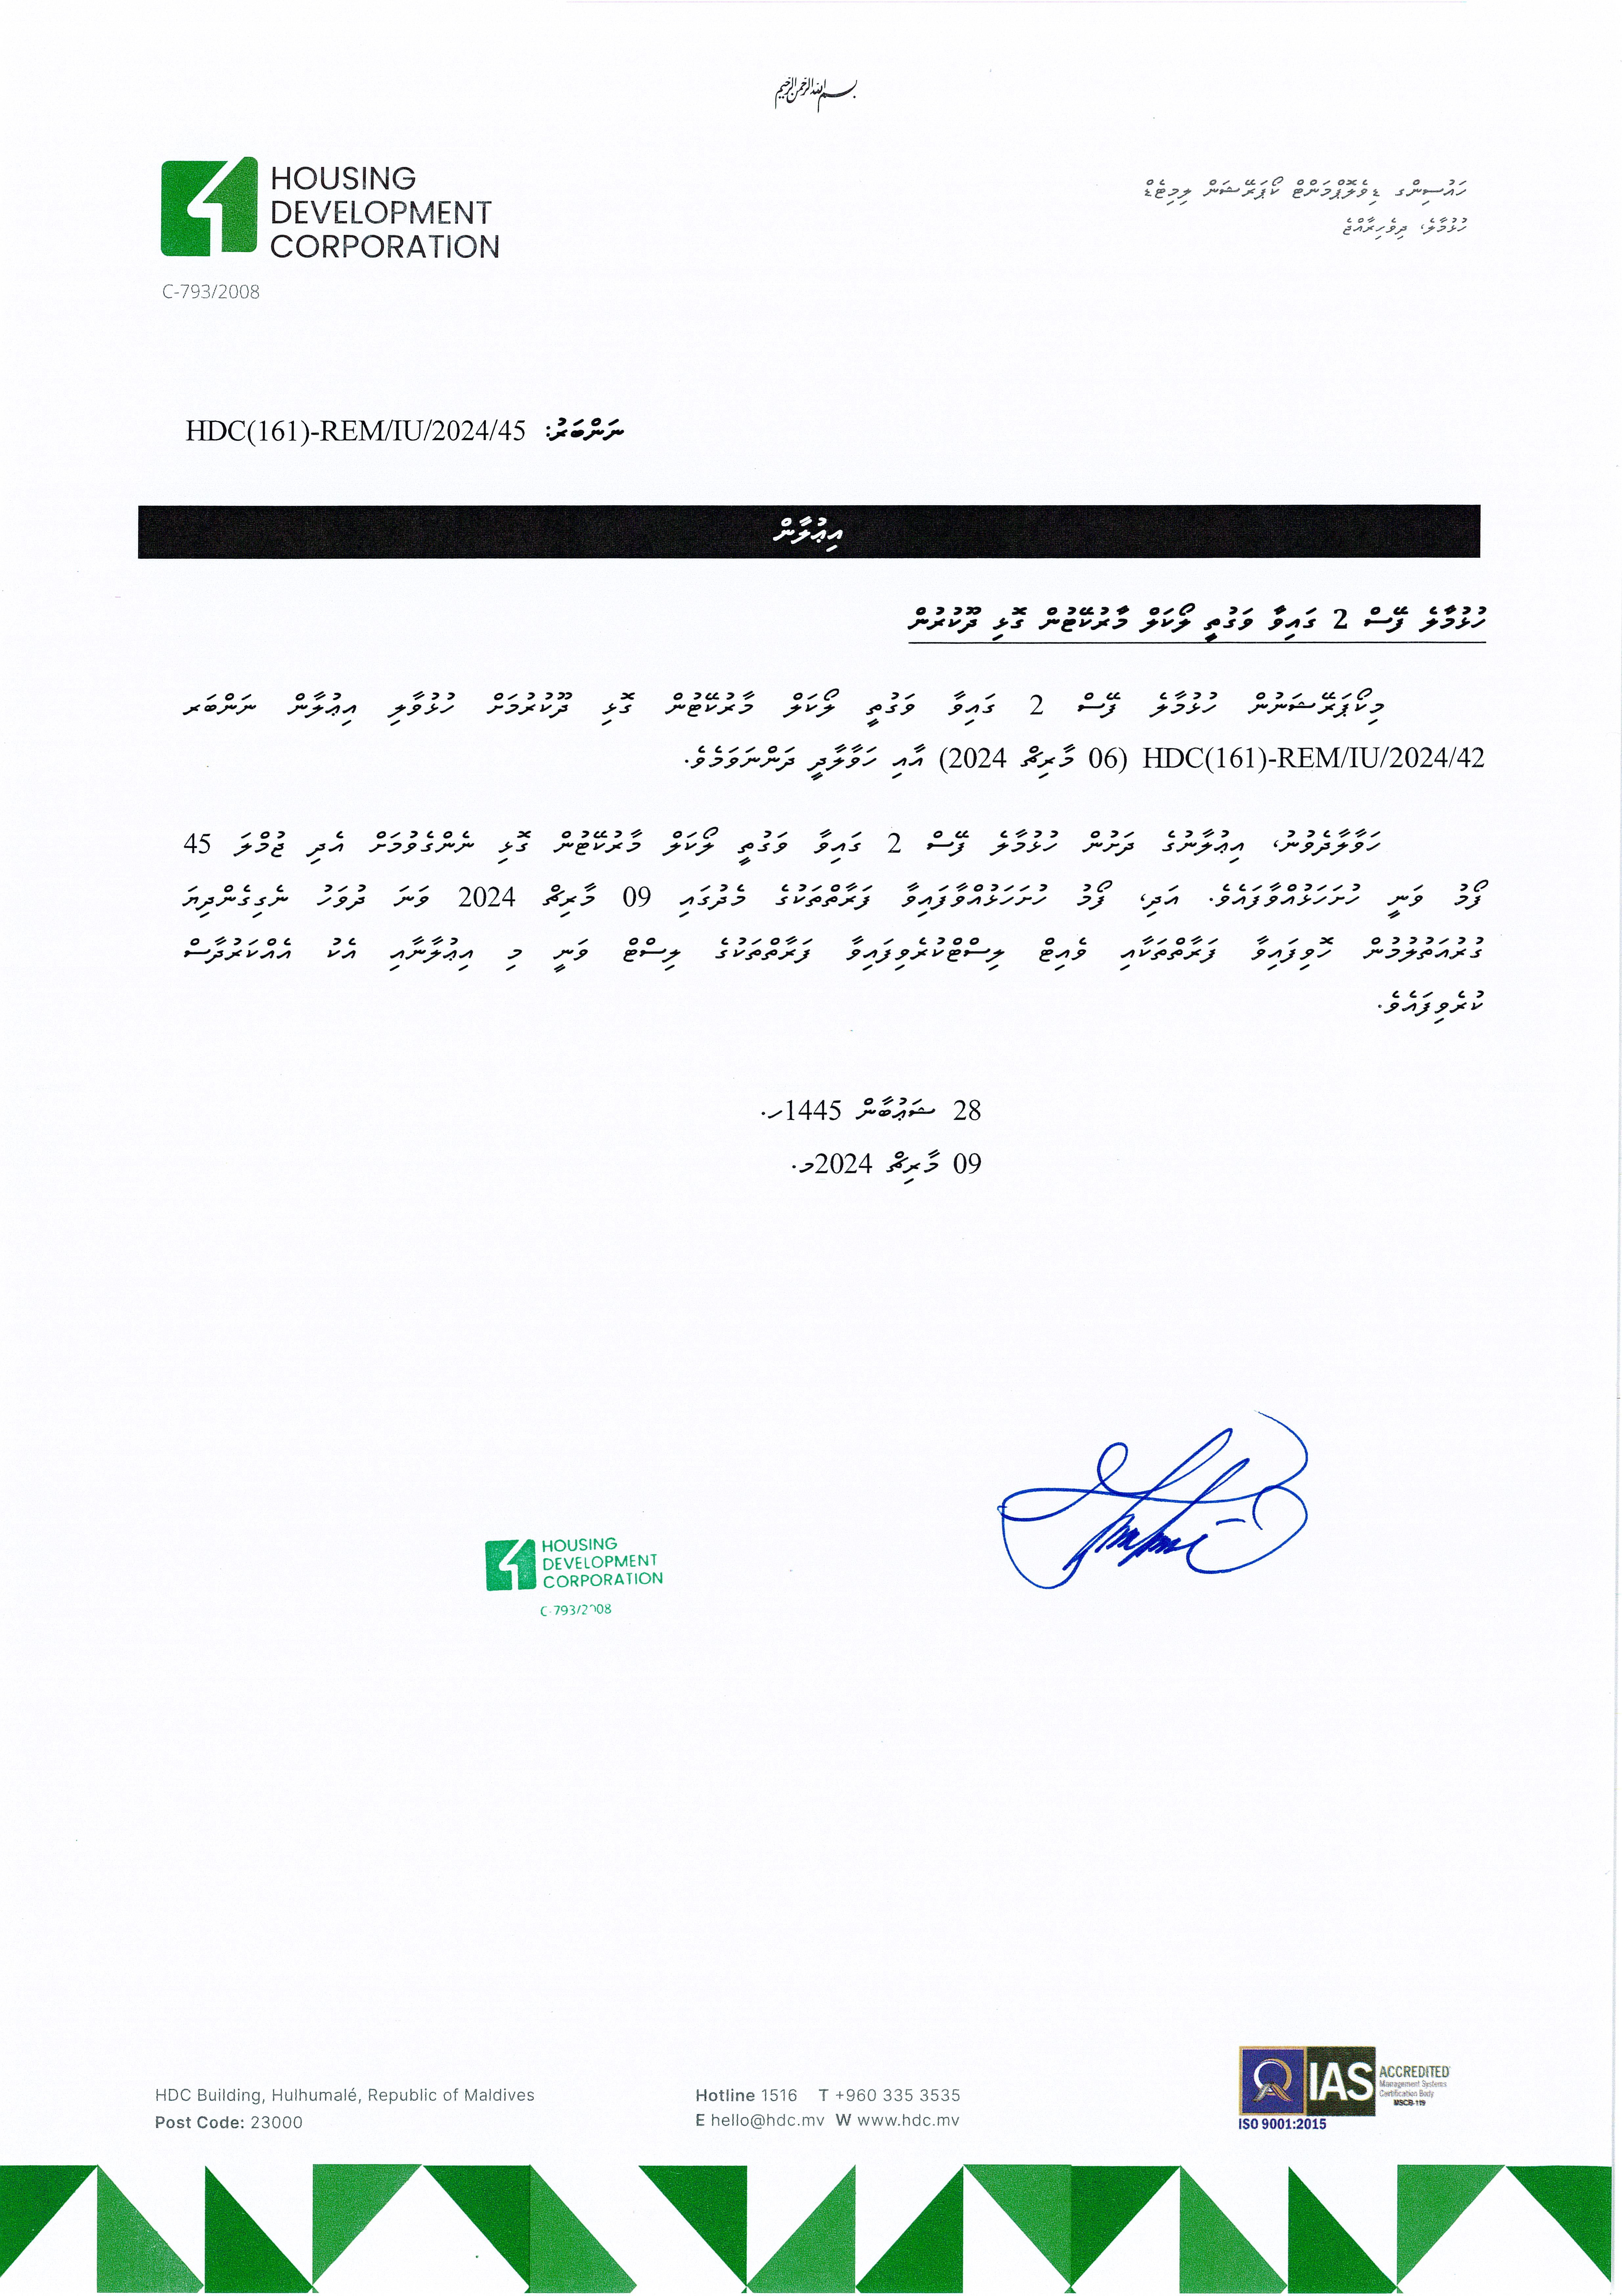 Draw Result  - Lease of slots from Temporary Local Market in Hulhumalé Phase 2